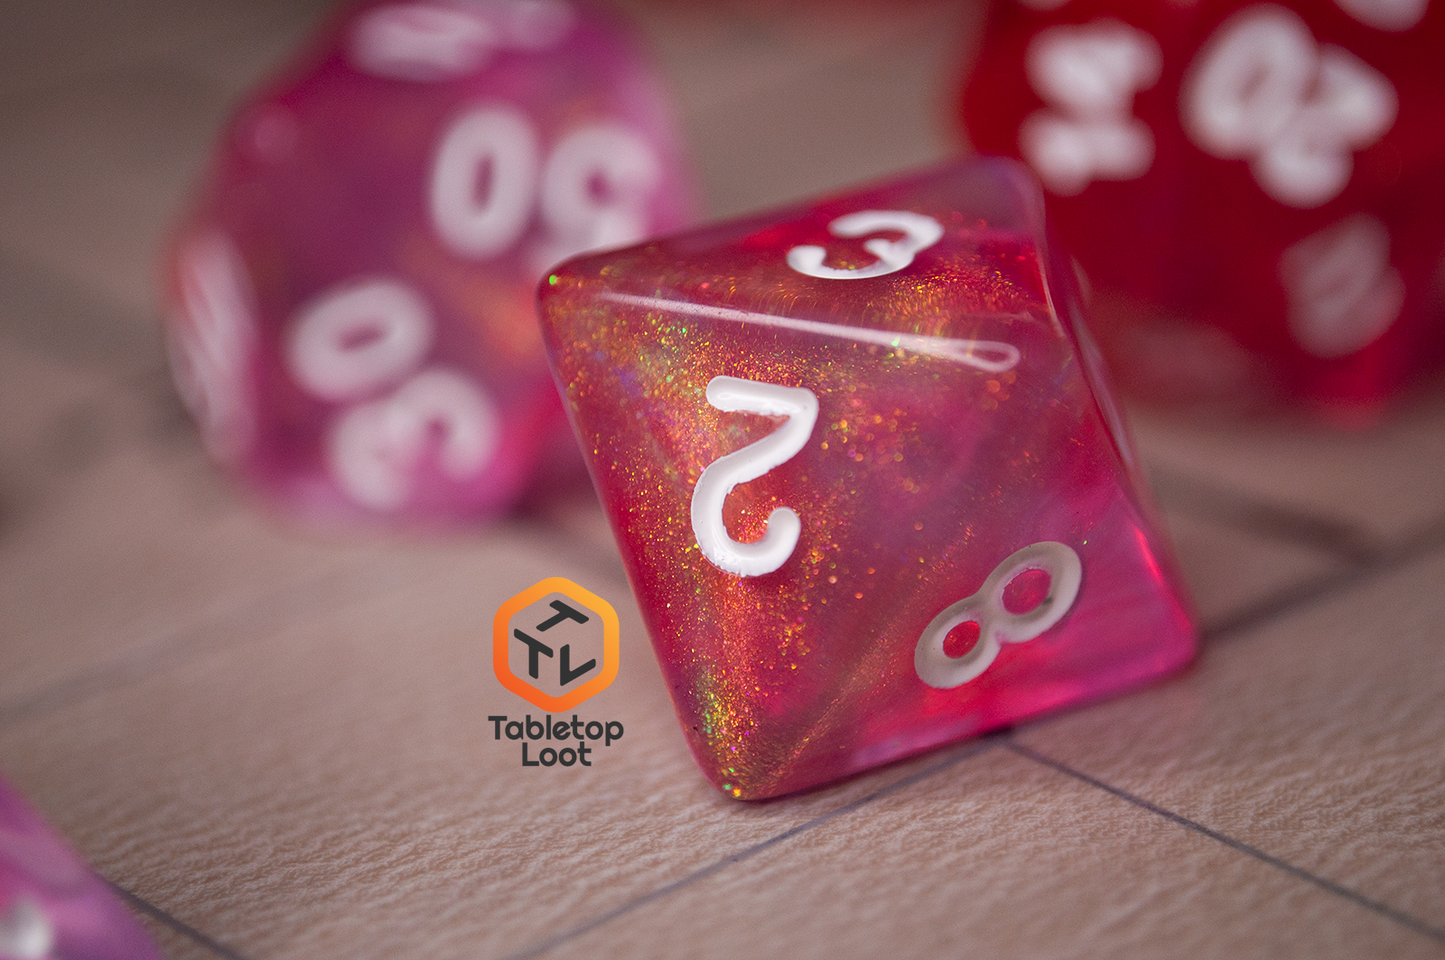 A close up of the D8 from the Pink Bunny 7 piece dice set from Tabletop Loot with yellow and gold shimmer in bright pink resin with white numbering.